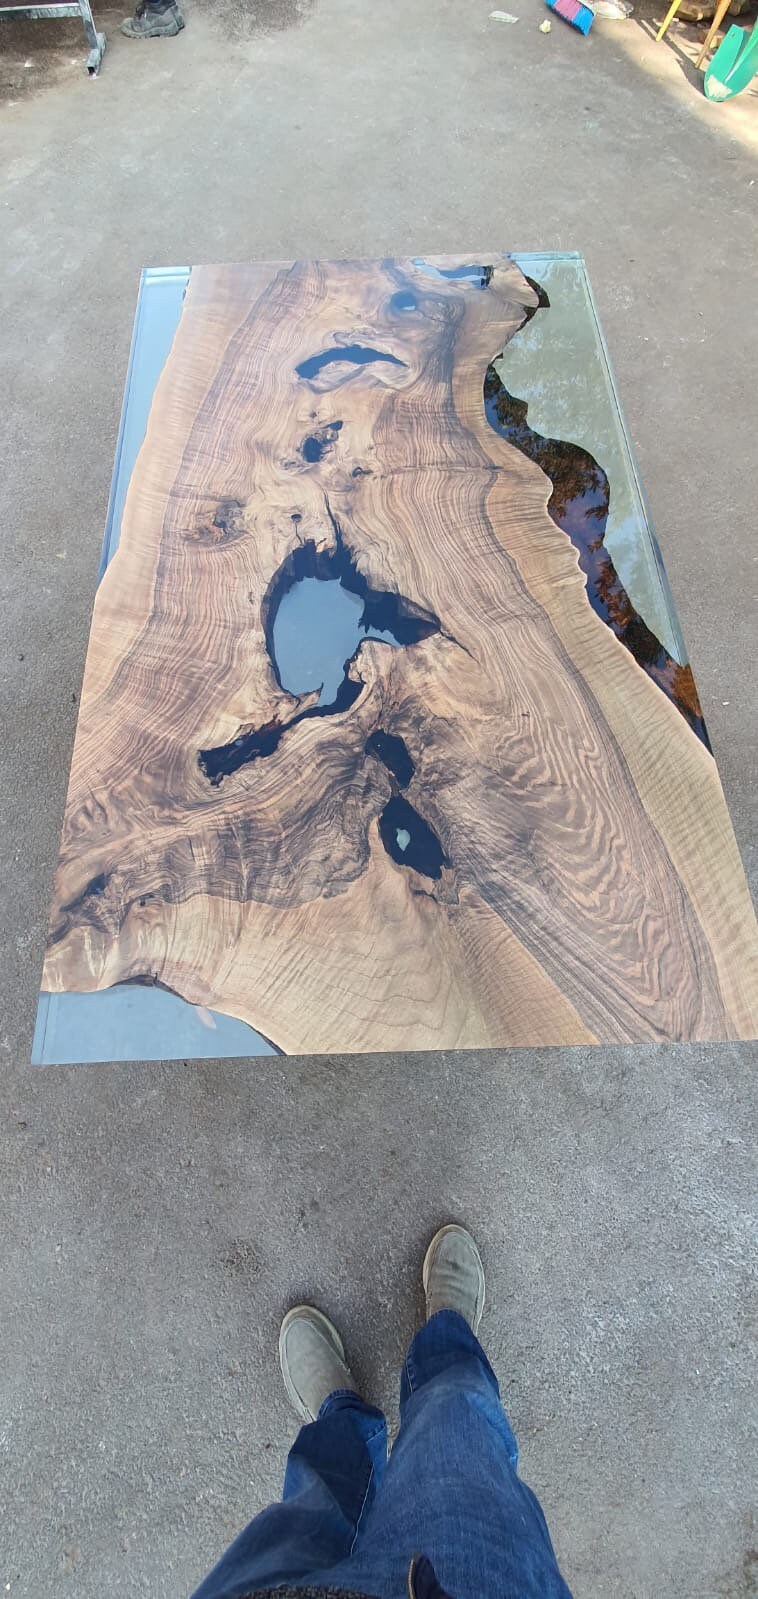 Grey River Epoxy Table Top / Large Rectangular Wood Table / Wooden